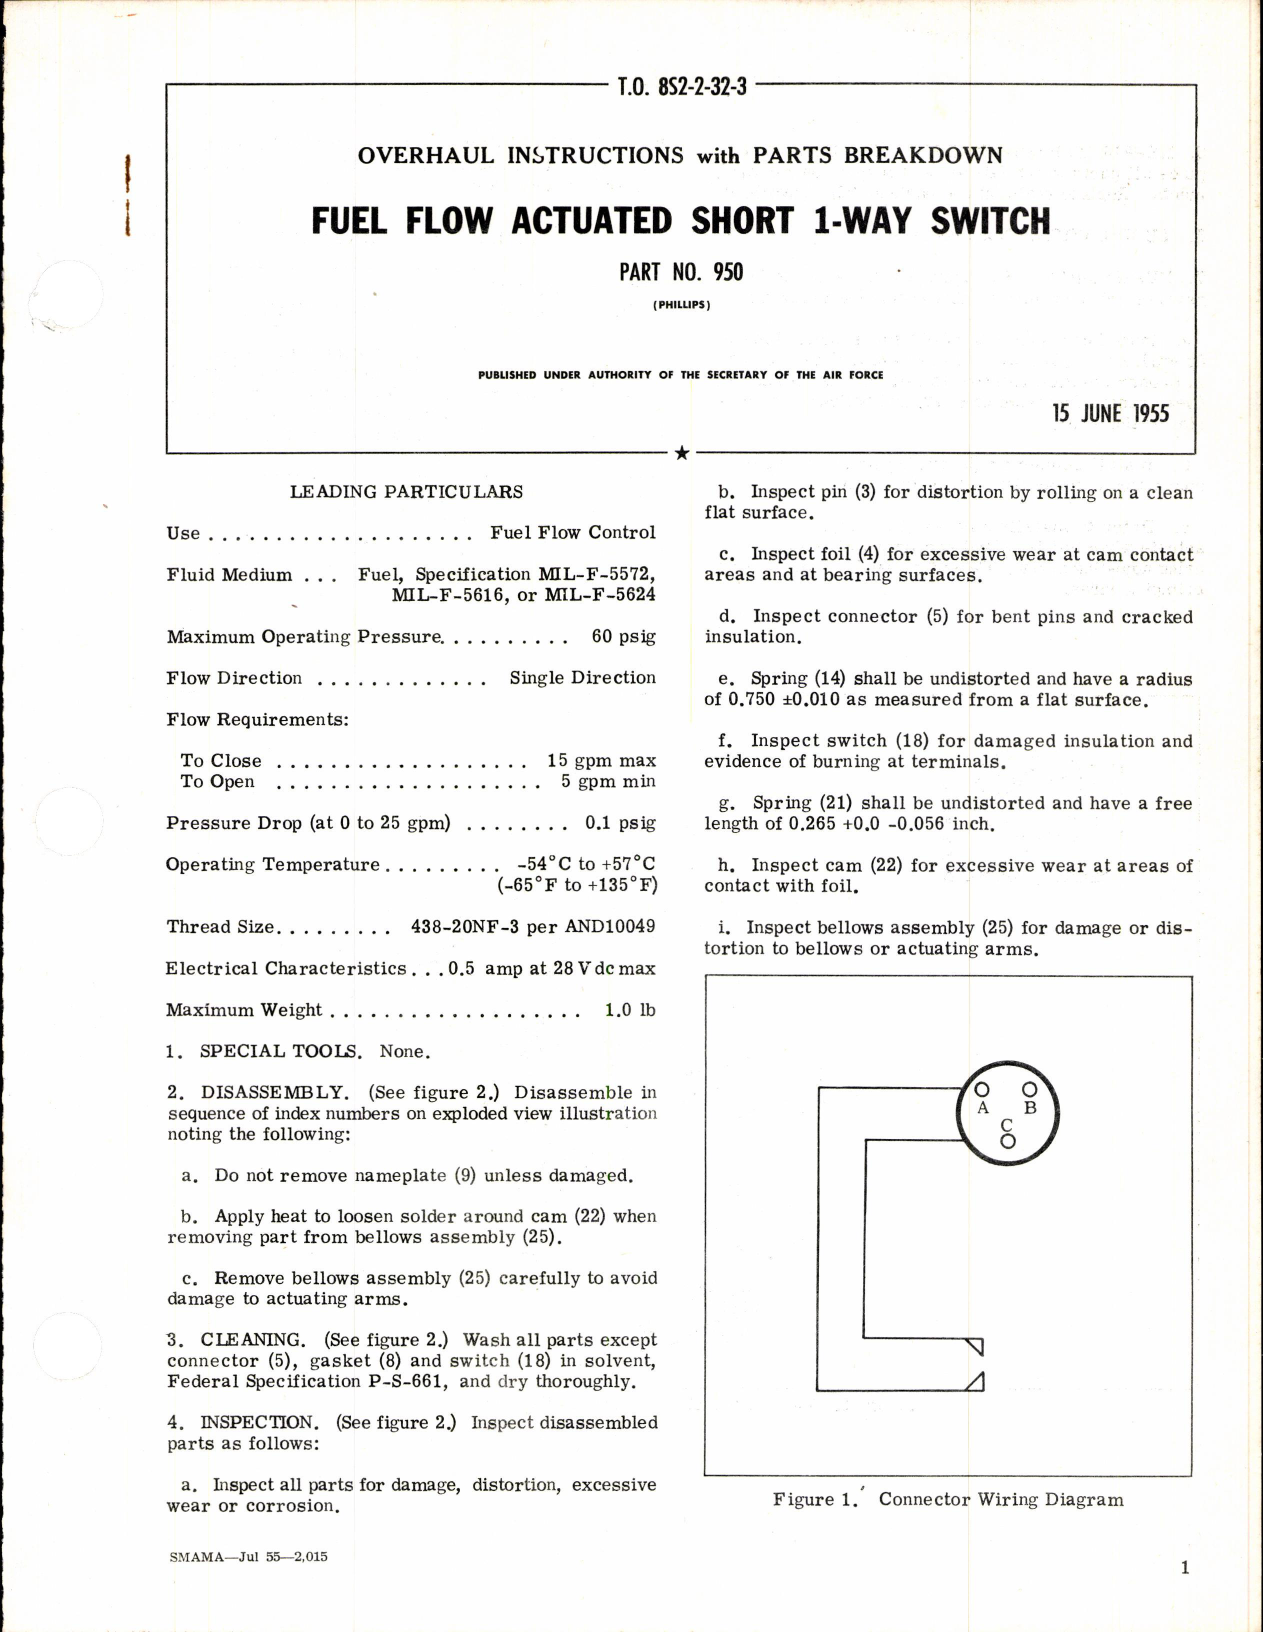 Sample page 1 from AirCorps Library document: Fuel Flow Actuated Short 1-Way Switch Part No 950